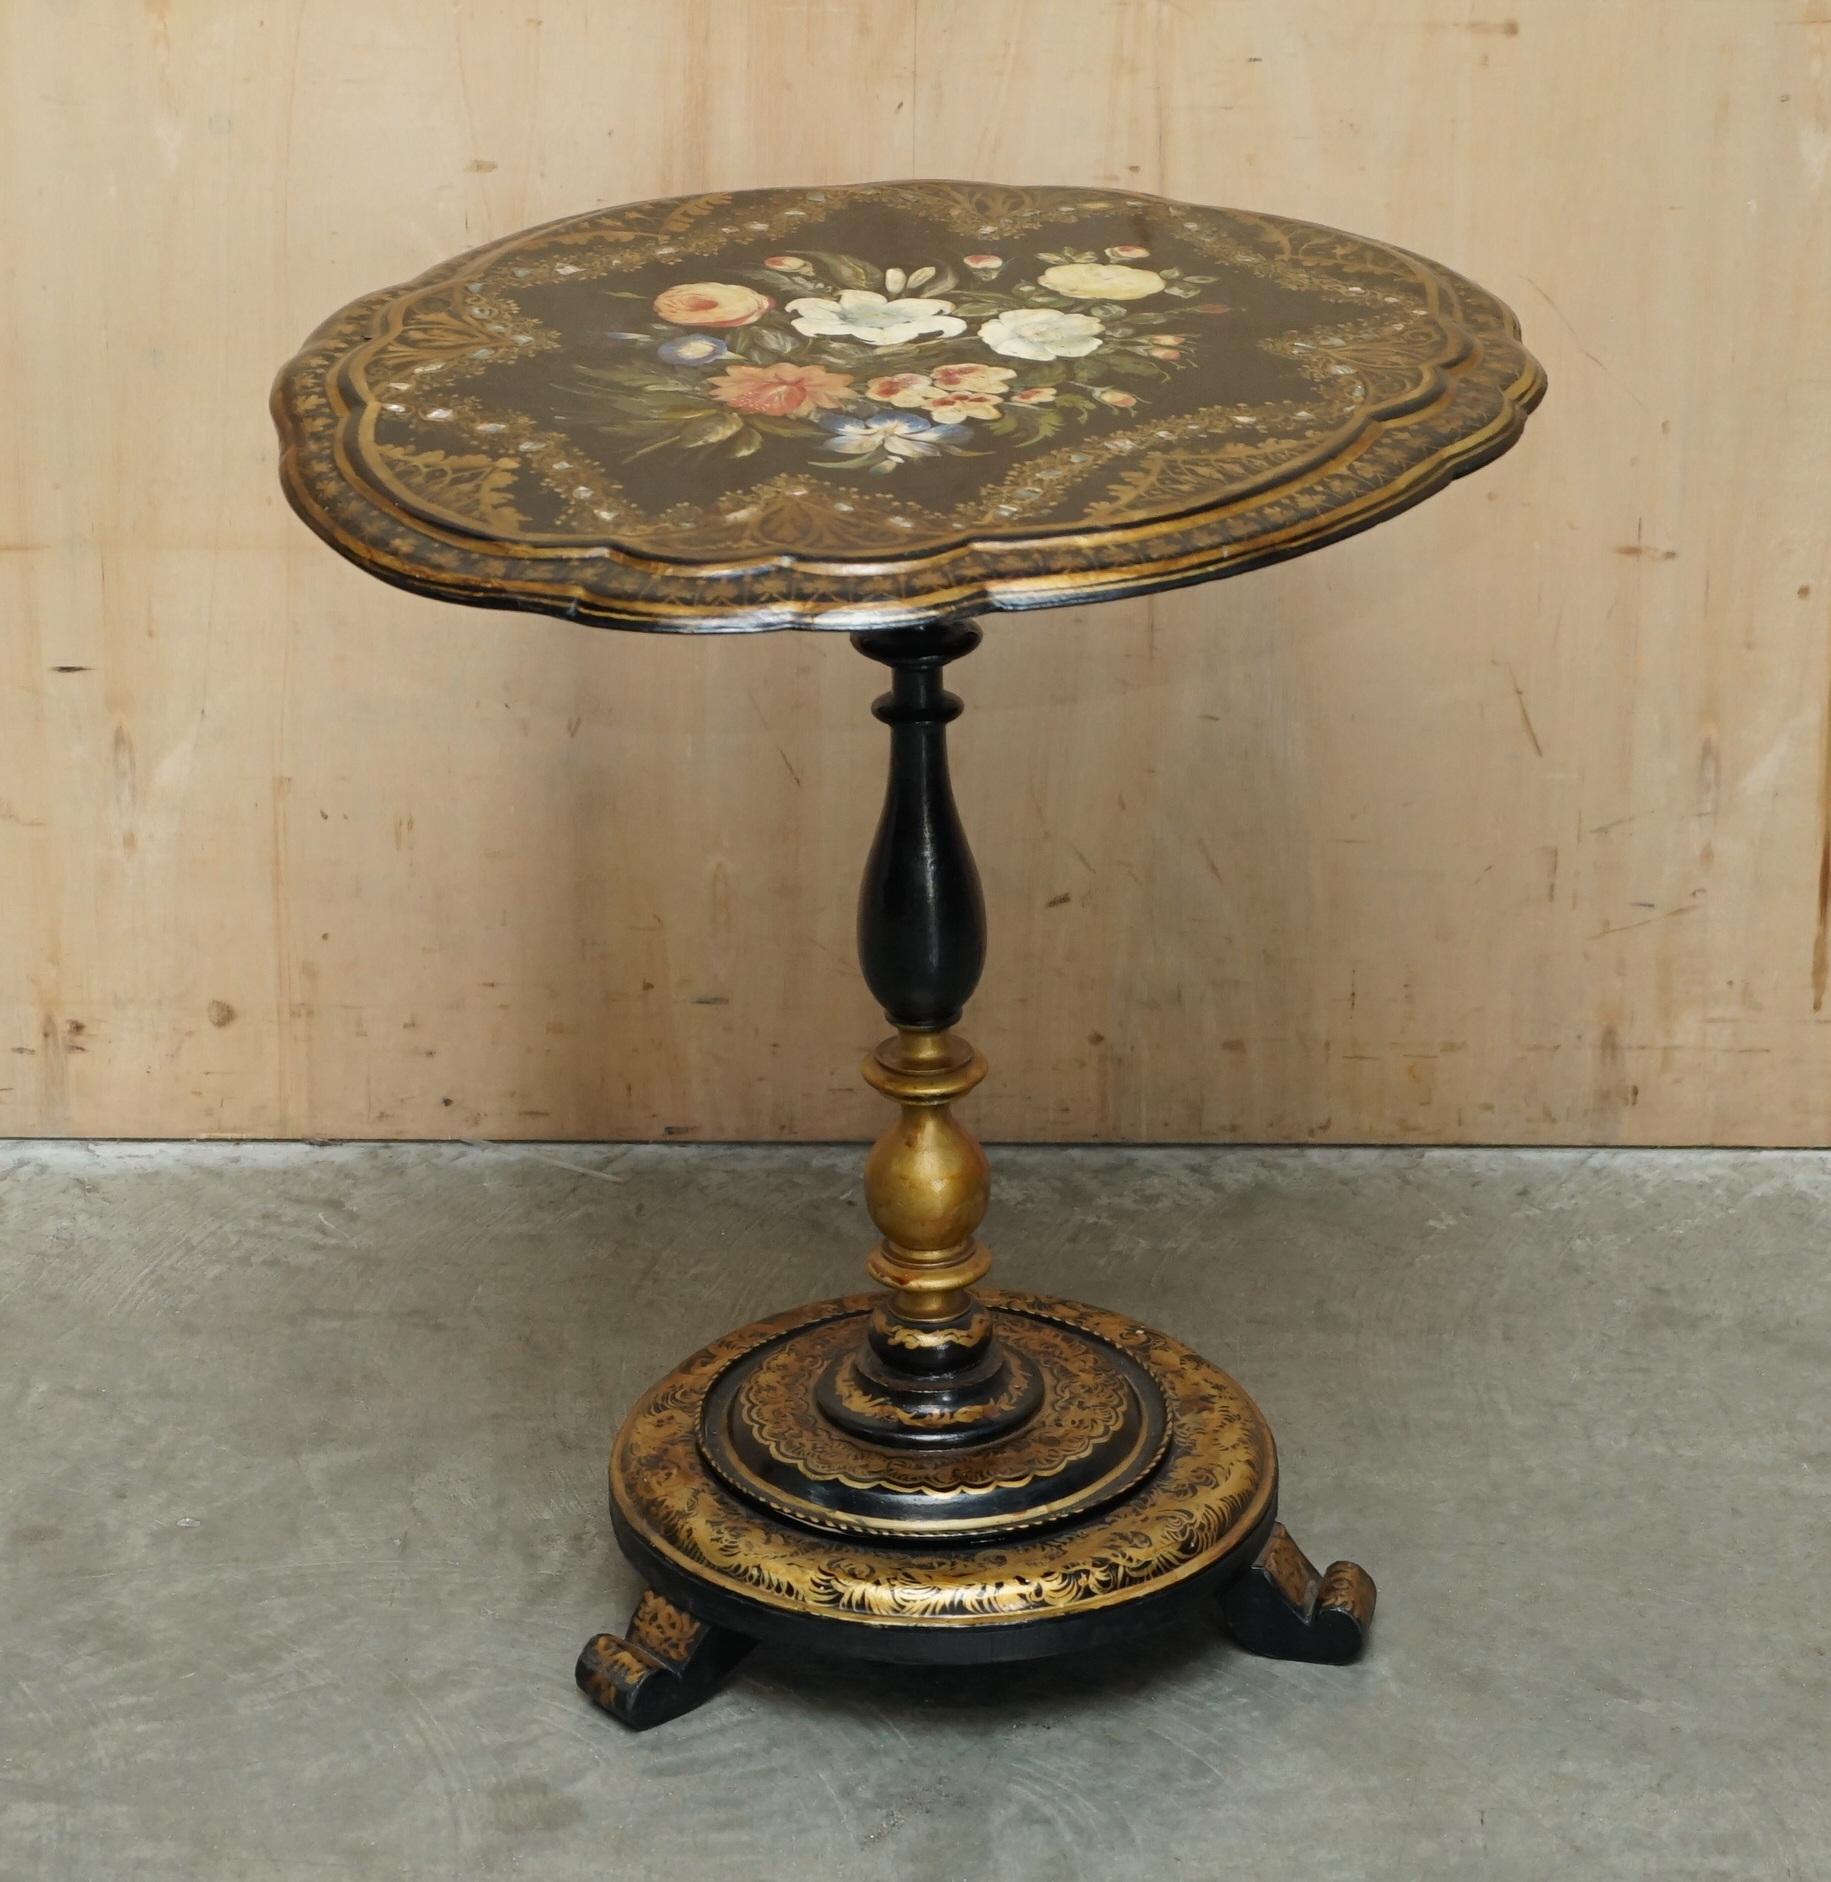 Royal House Antiques

Royal House Antiques is delighted to offer for sale this very fine Antique Regency circa 1810-1820 black lacquered with Mother of Pearl inlaid and hand painted floral finish tilt top occasional table

Please note the delivery